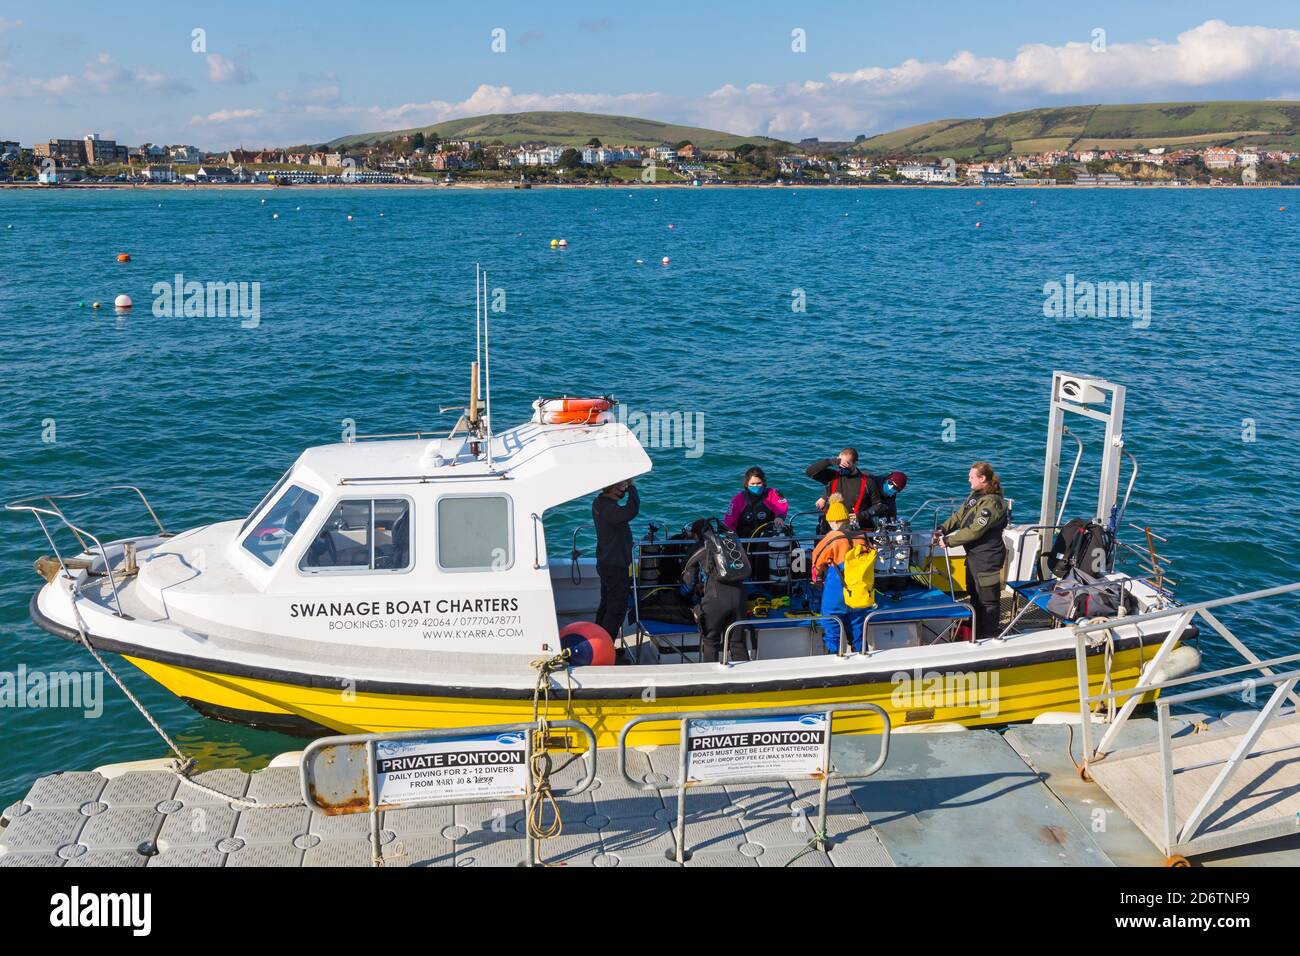 Divers on board Swanage Boat Charters boat ready to go diving at Swanage, Dorset UK in October, wearing face masks during Covid19 Coronavirus pandemic Stock Photo